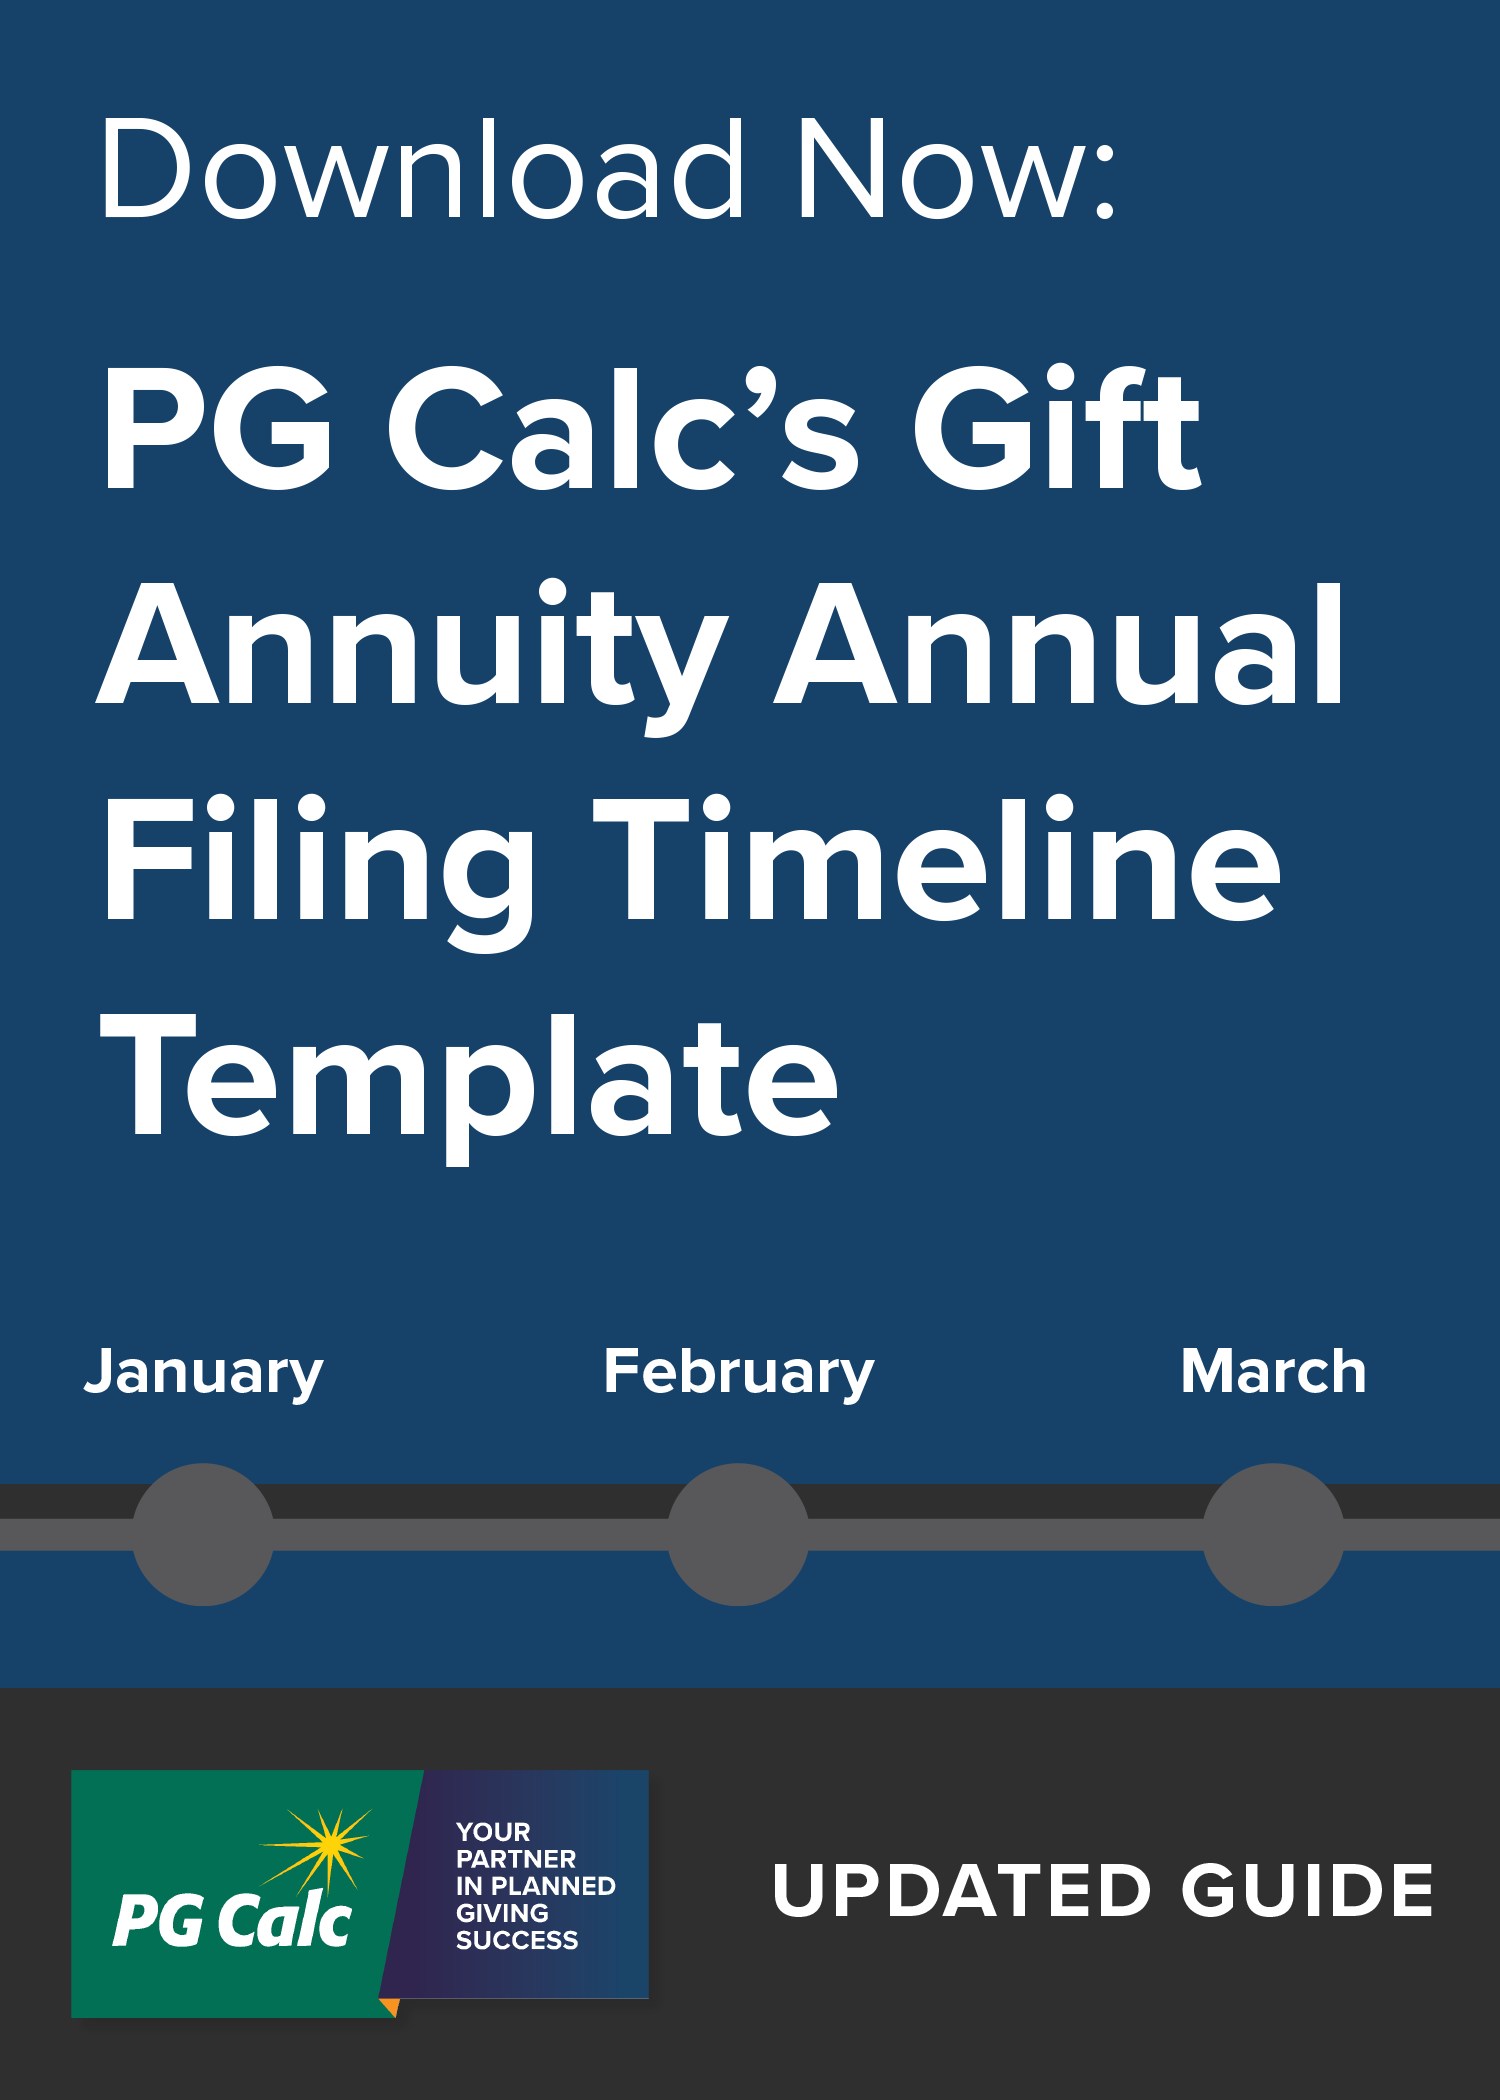 Gift Annuity Annual Filing Timeline